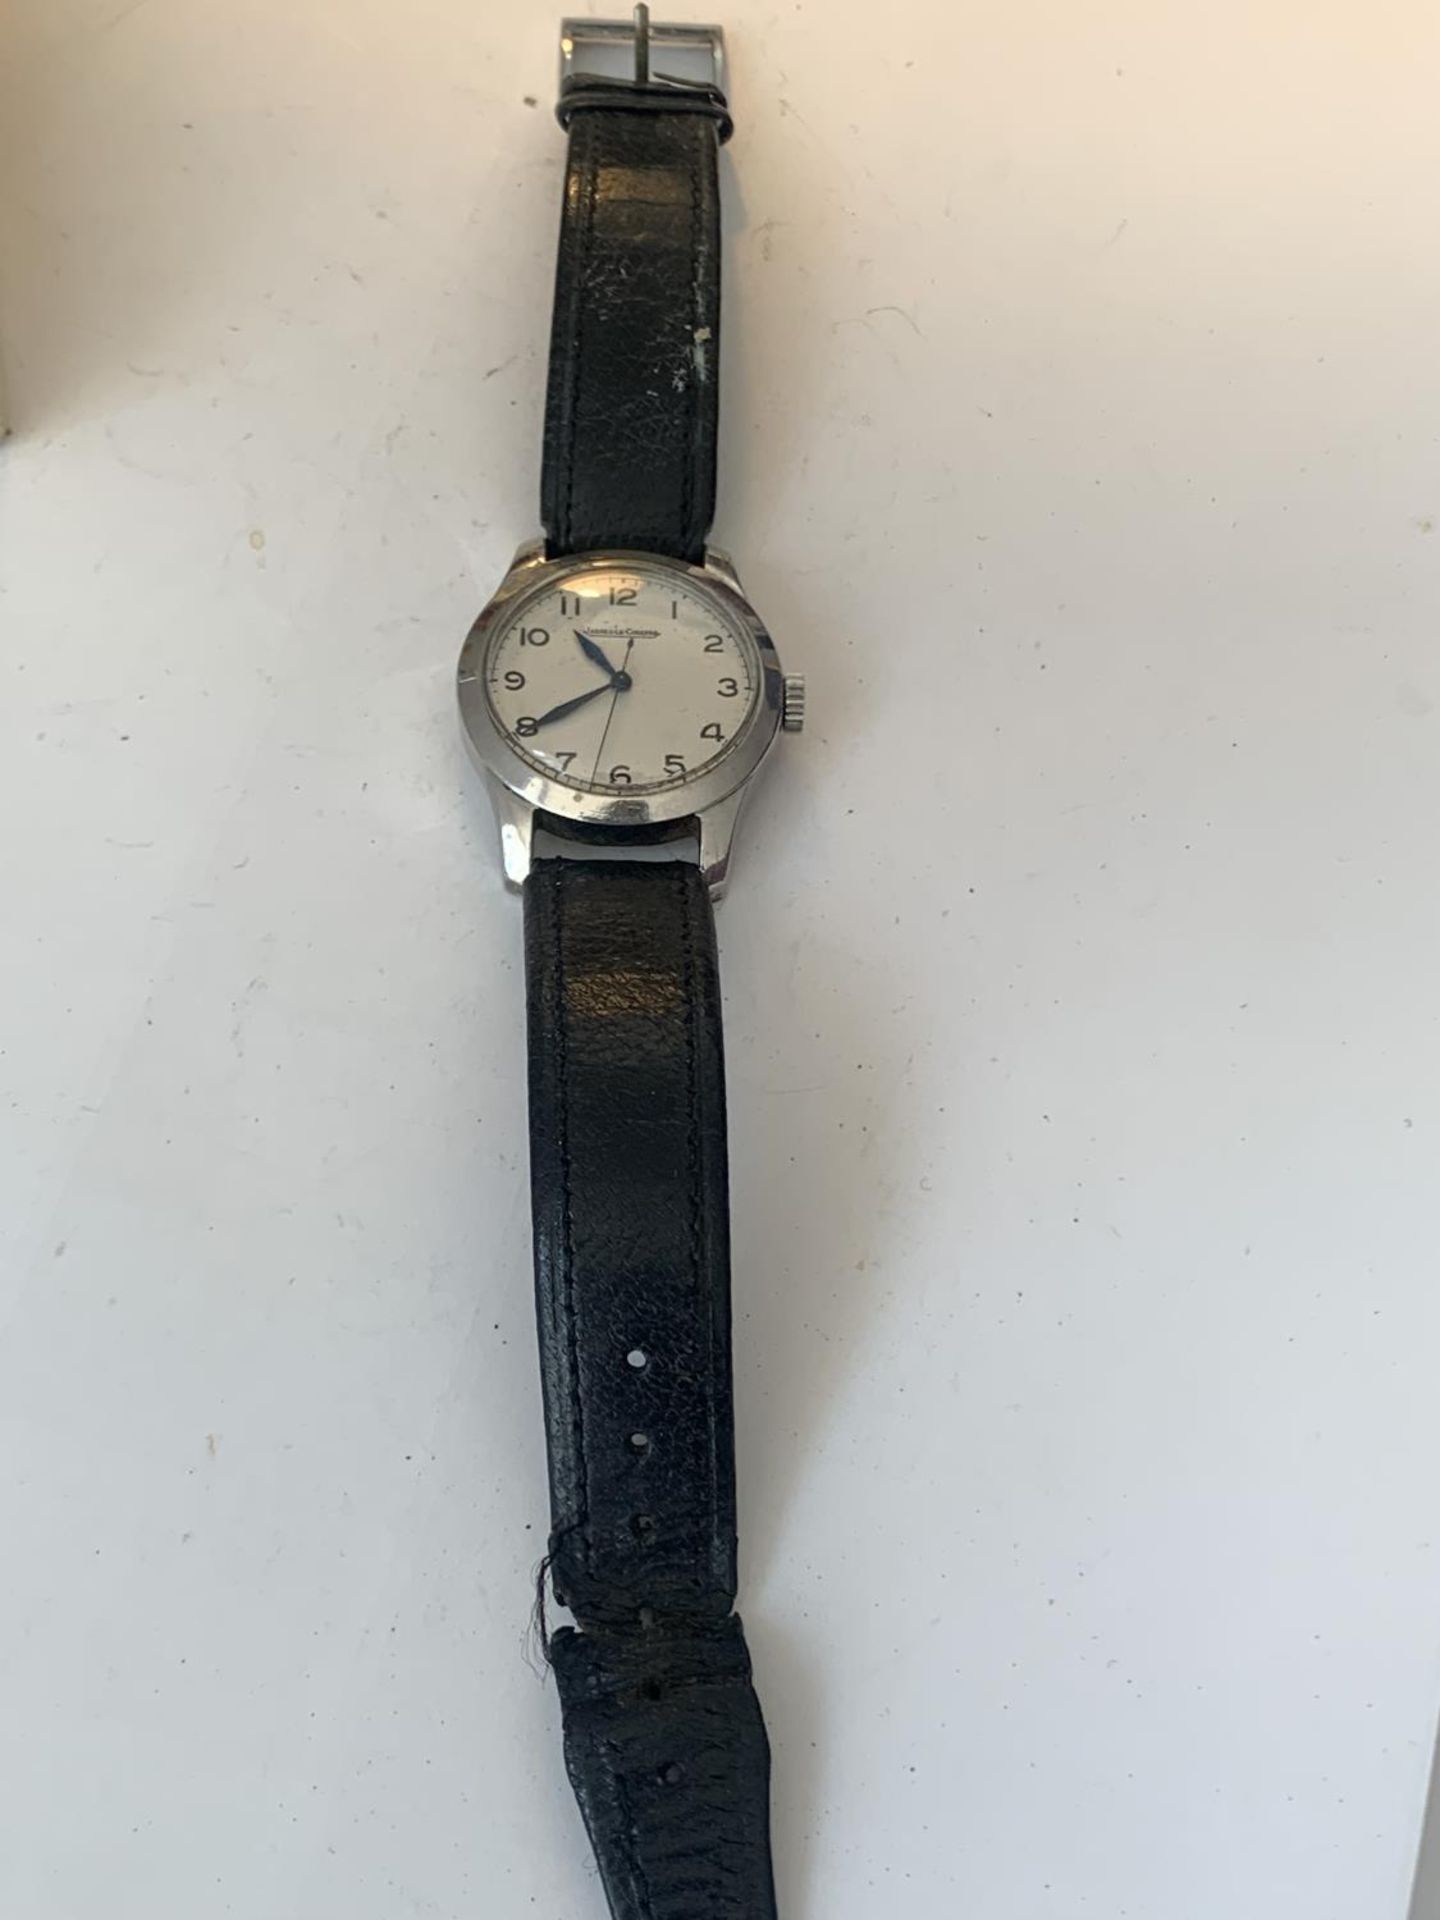 A VINTAGE JAEGER LeCOUTRE WRIST WATCH WITH WHITE FACE AND BLACK LEATHER STRAP POSSIBLY MILITARY.